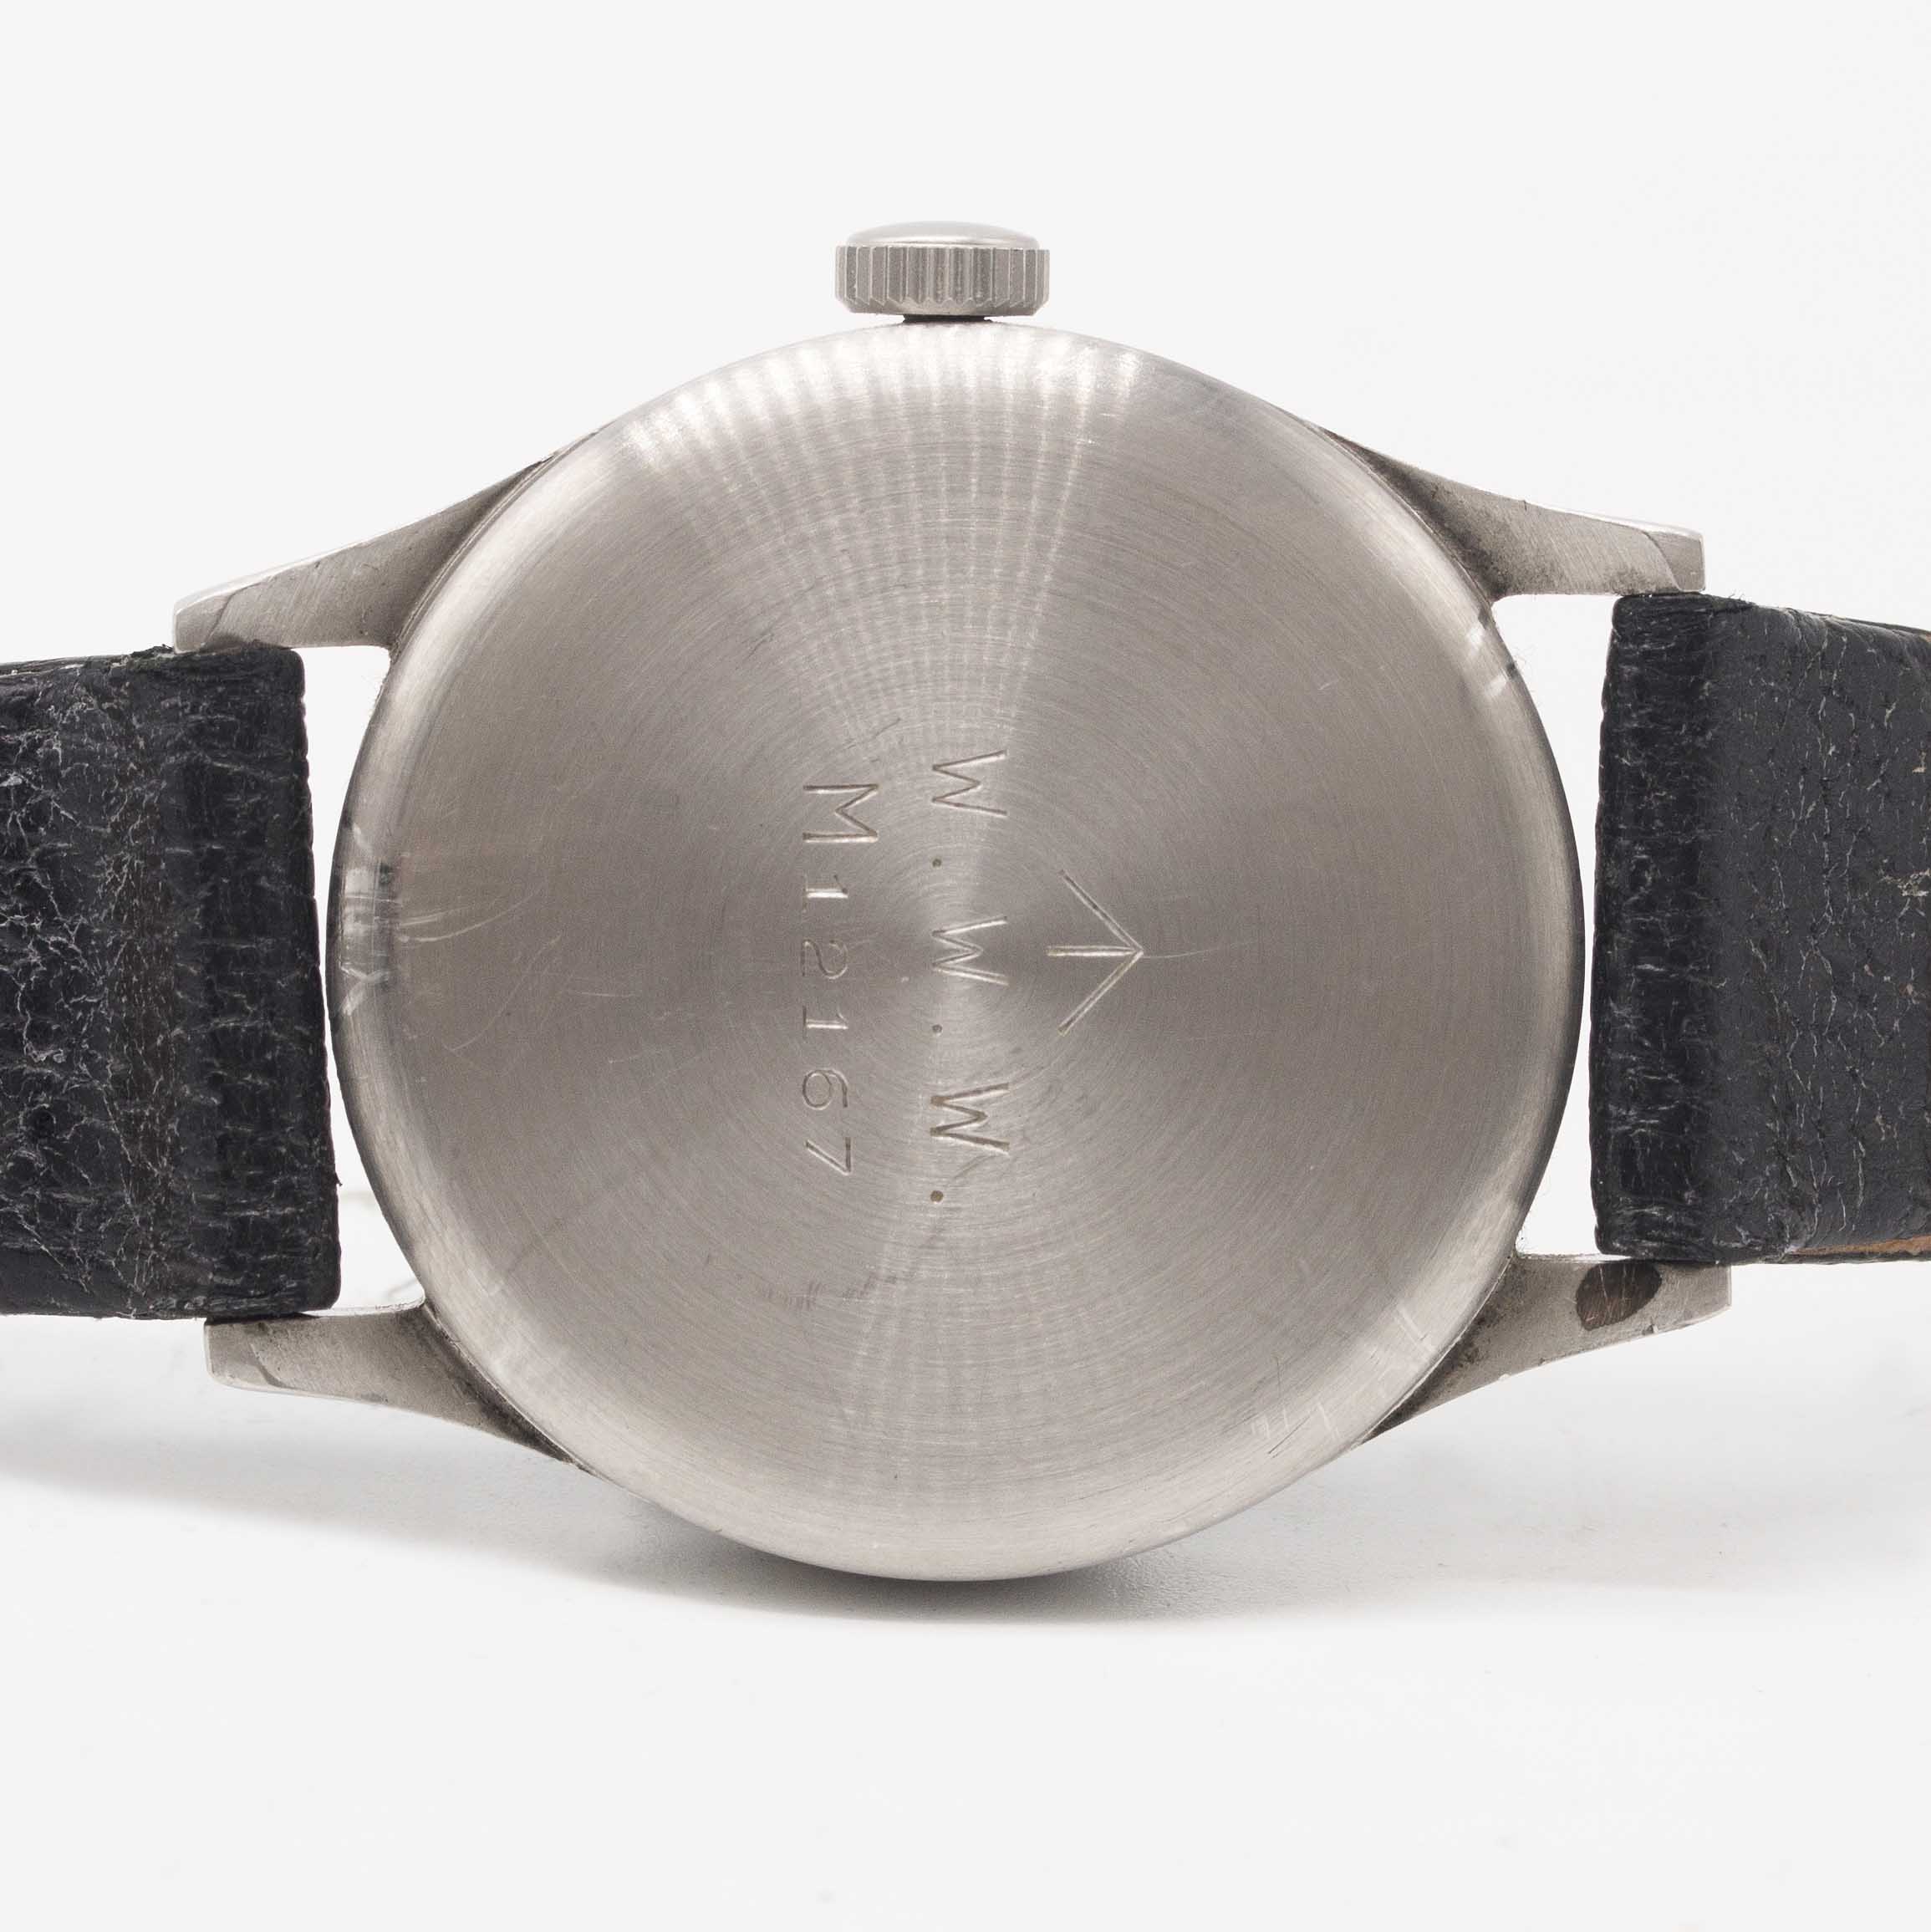 A GENTLEMAN'S STAINLESS STEEL BRITISH MILITARY IWC MARK 10 W.W.W. WRIST WATCH CIRCA 1940s, PART OF - Image 6 of 7